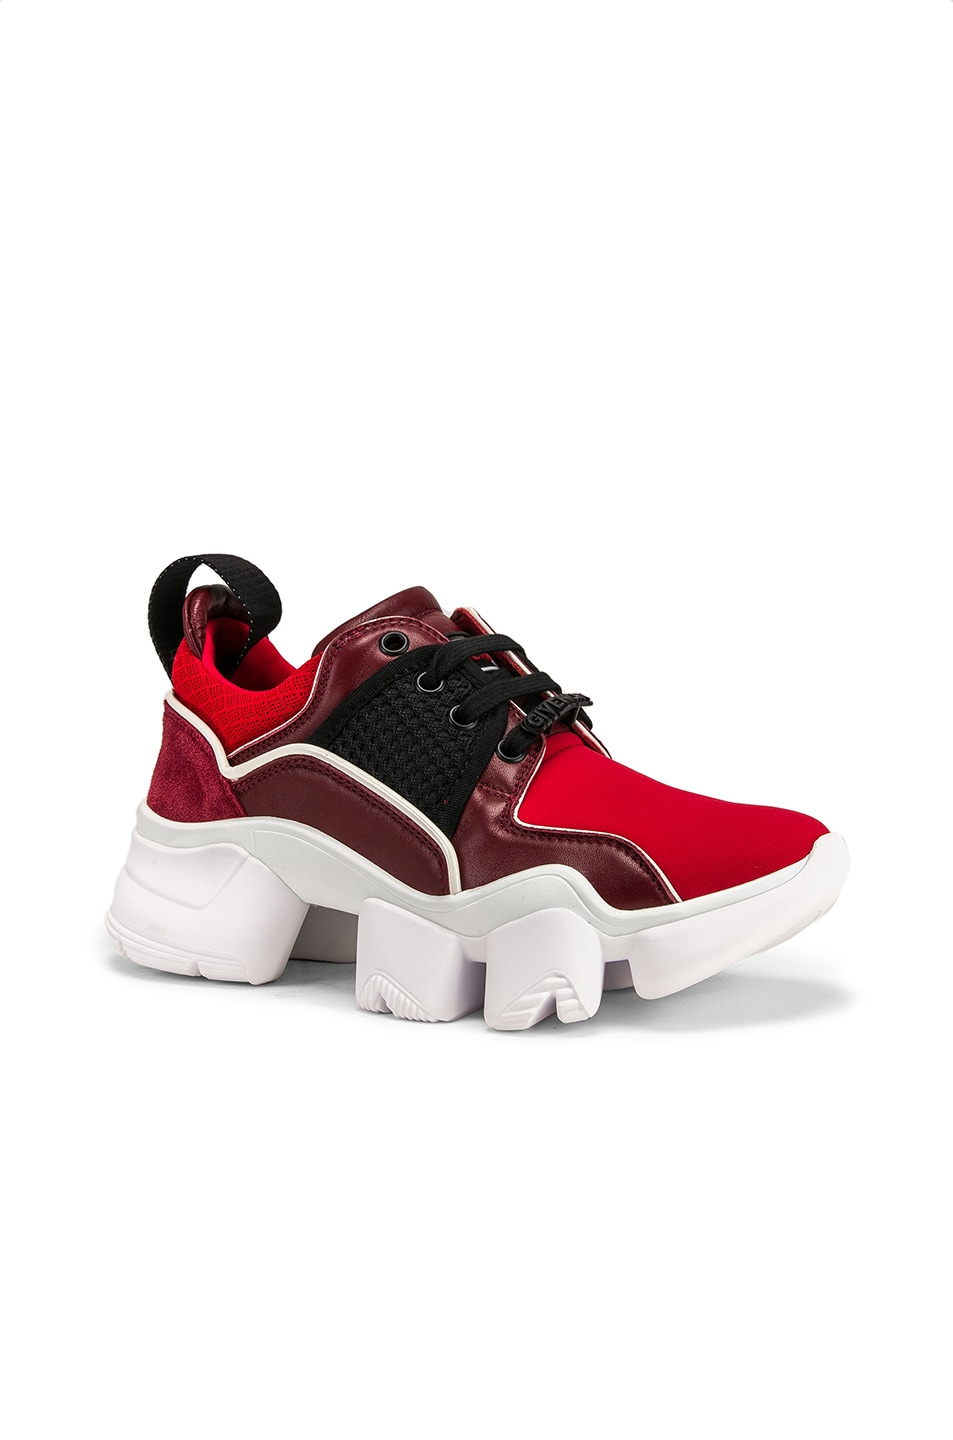 Givenchy Jaw Low Sneakers in Wine | FWRD